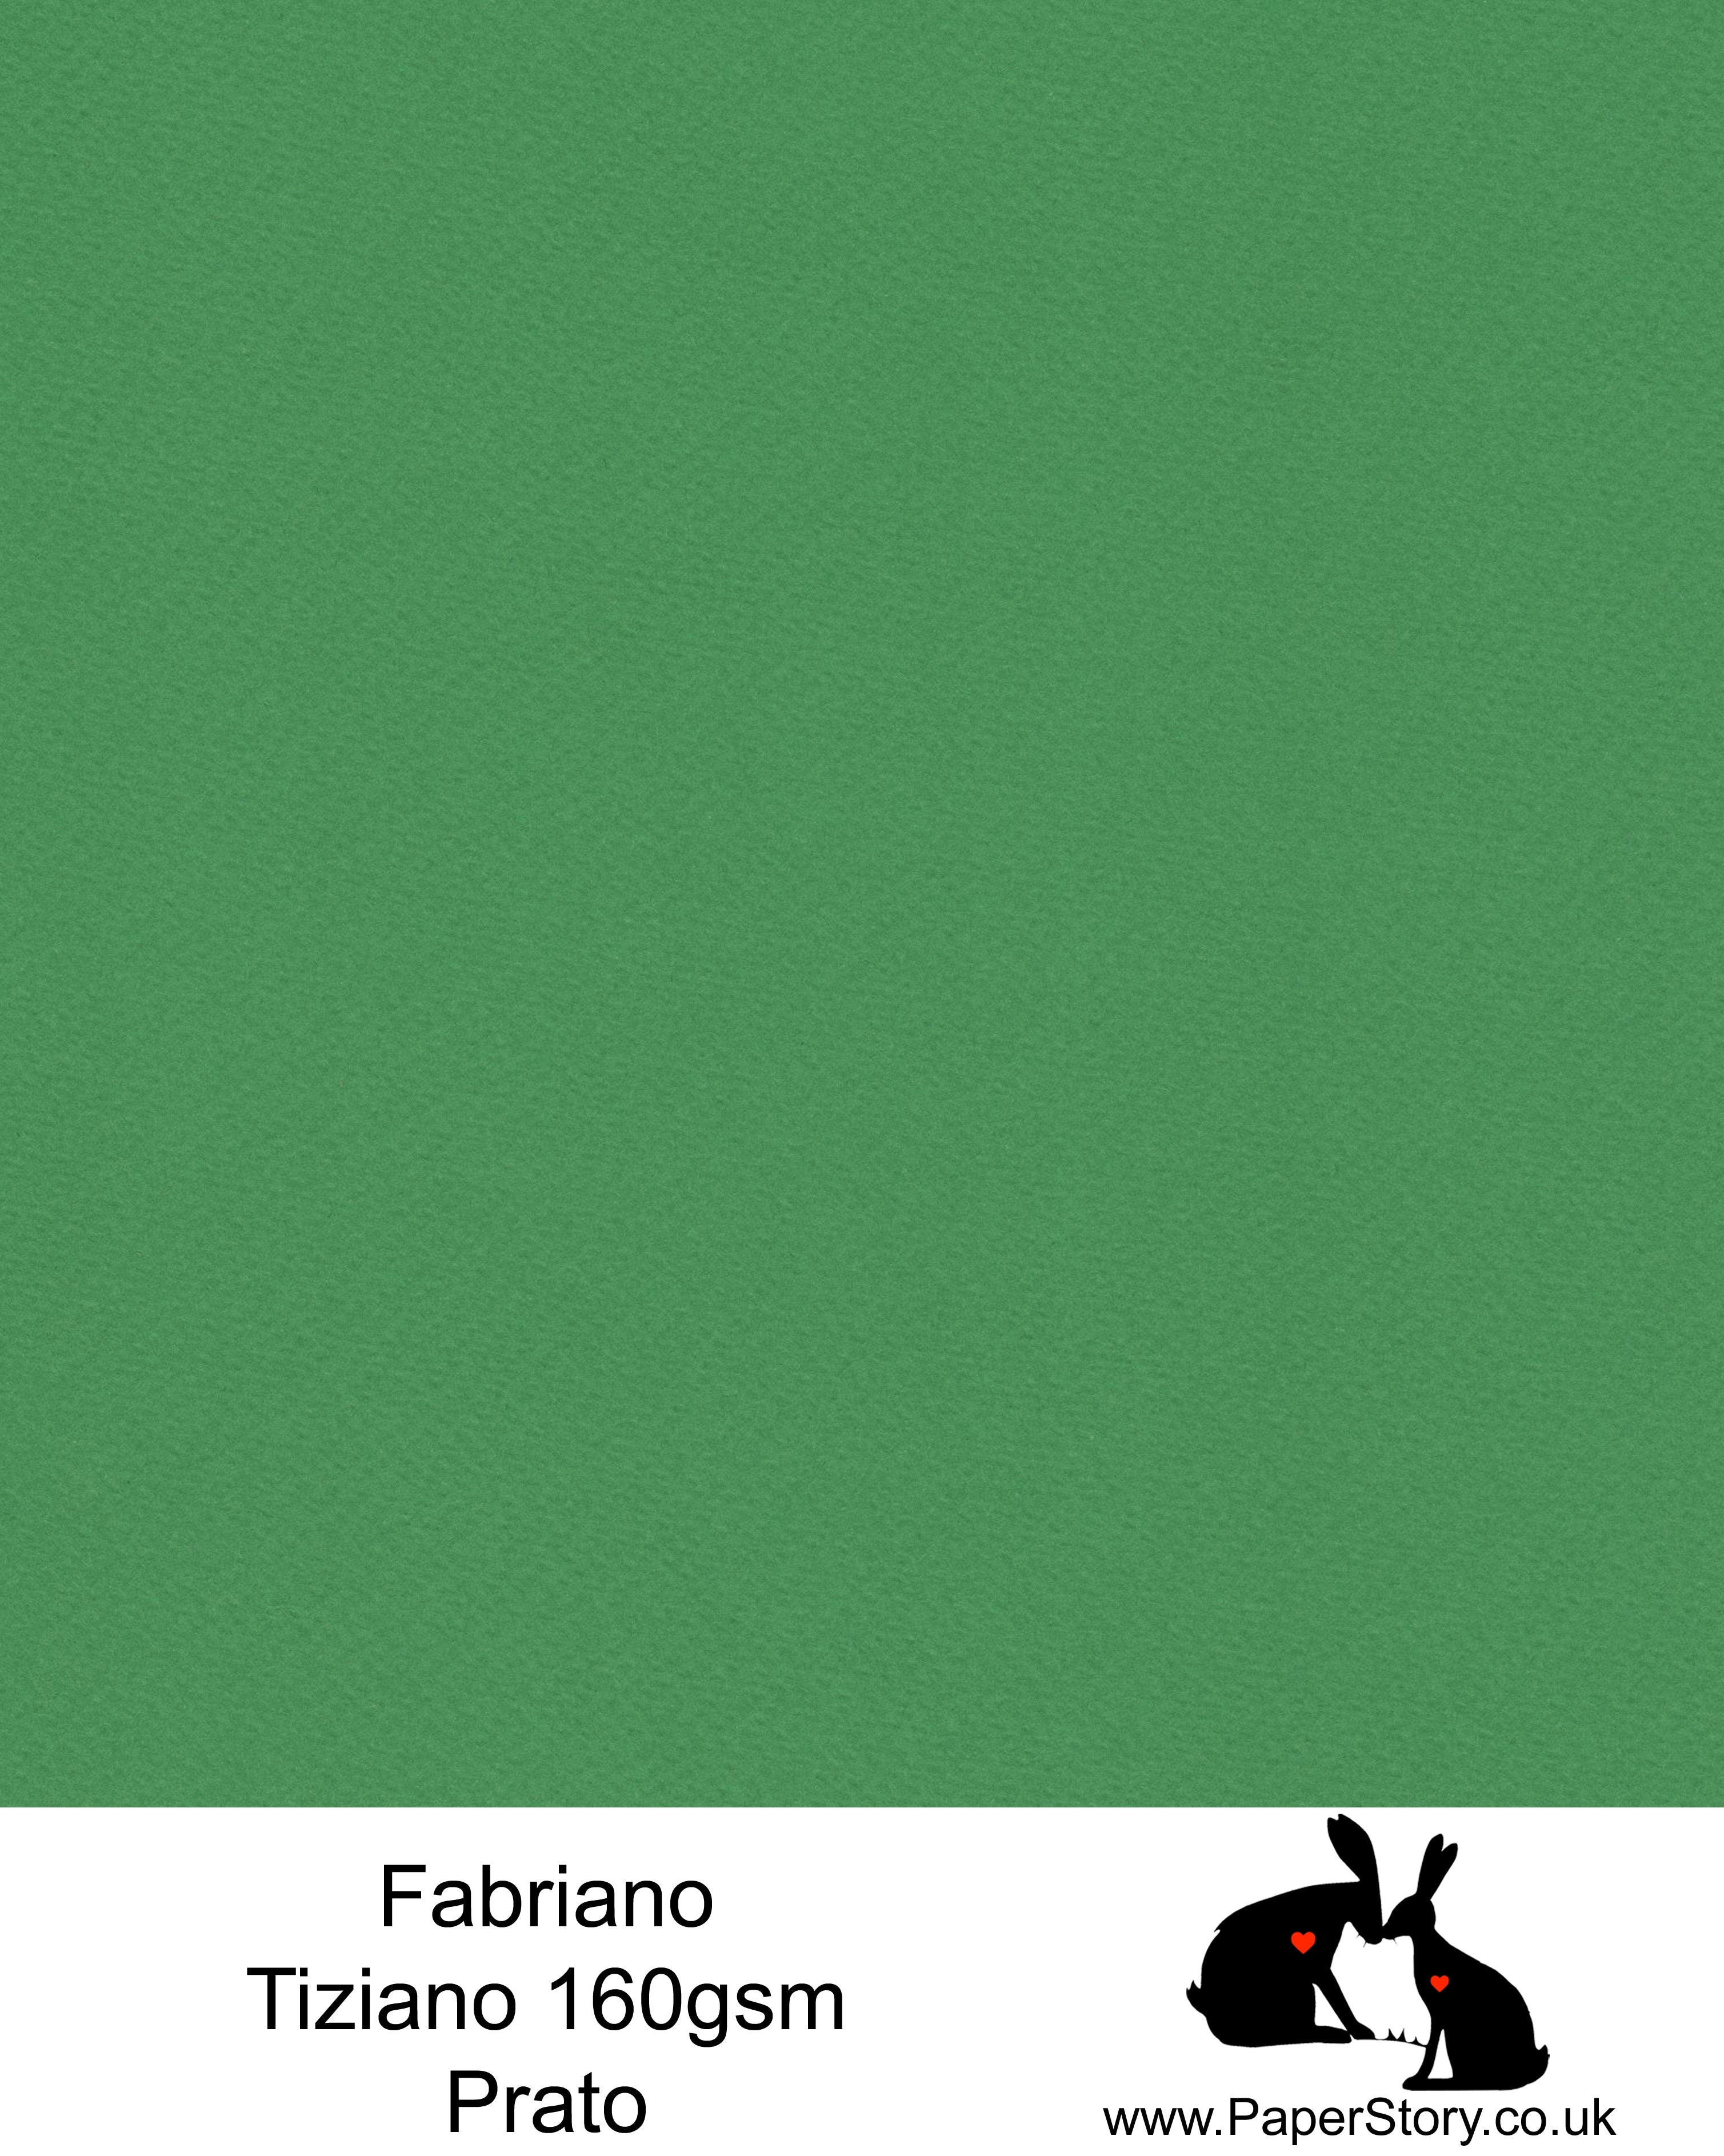 High quality paper from Italy, Prato fresh grass green Fabriano Tiziano is 160 gsm, Tiziano has a high cotton content, a textured naturally sized surface. This paper is acid free to guarantee long permanence in time, pH neutral. It has highly lightfast colours, an excellent surface making and sizing which make this paper particularly suitable for papercutting